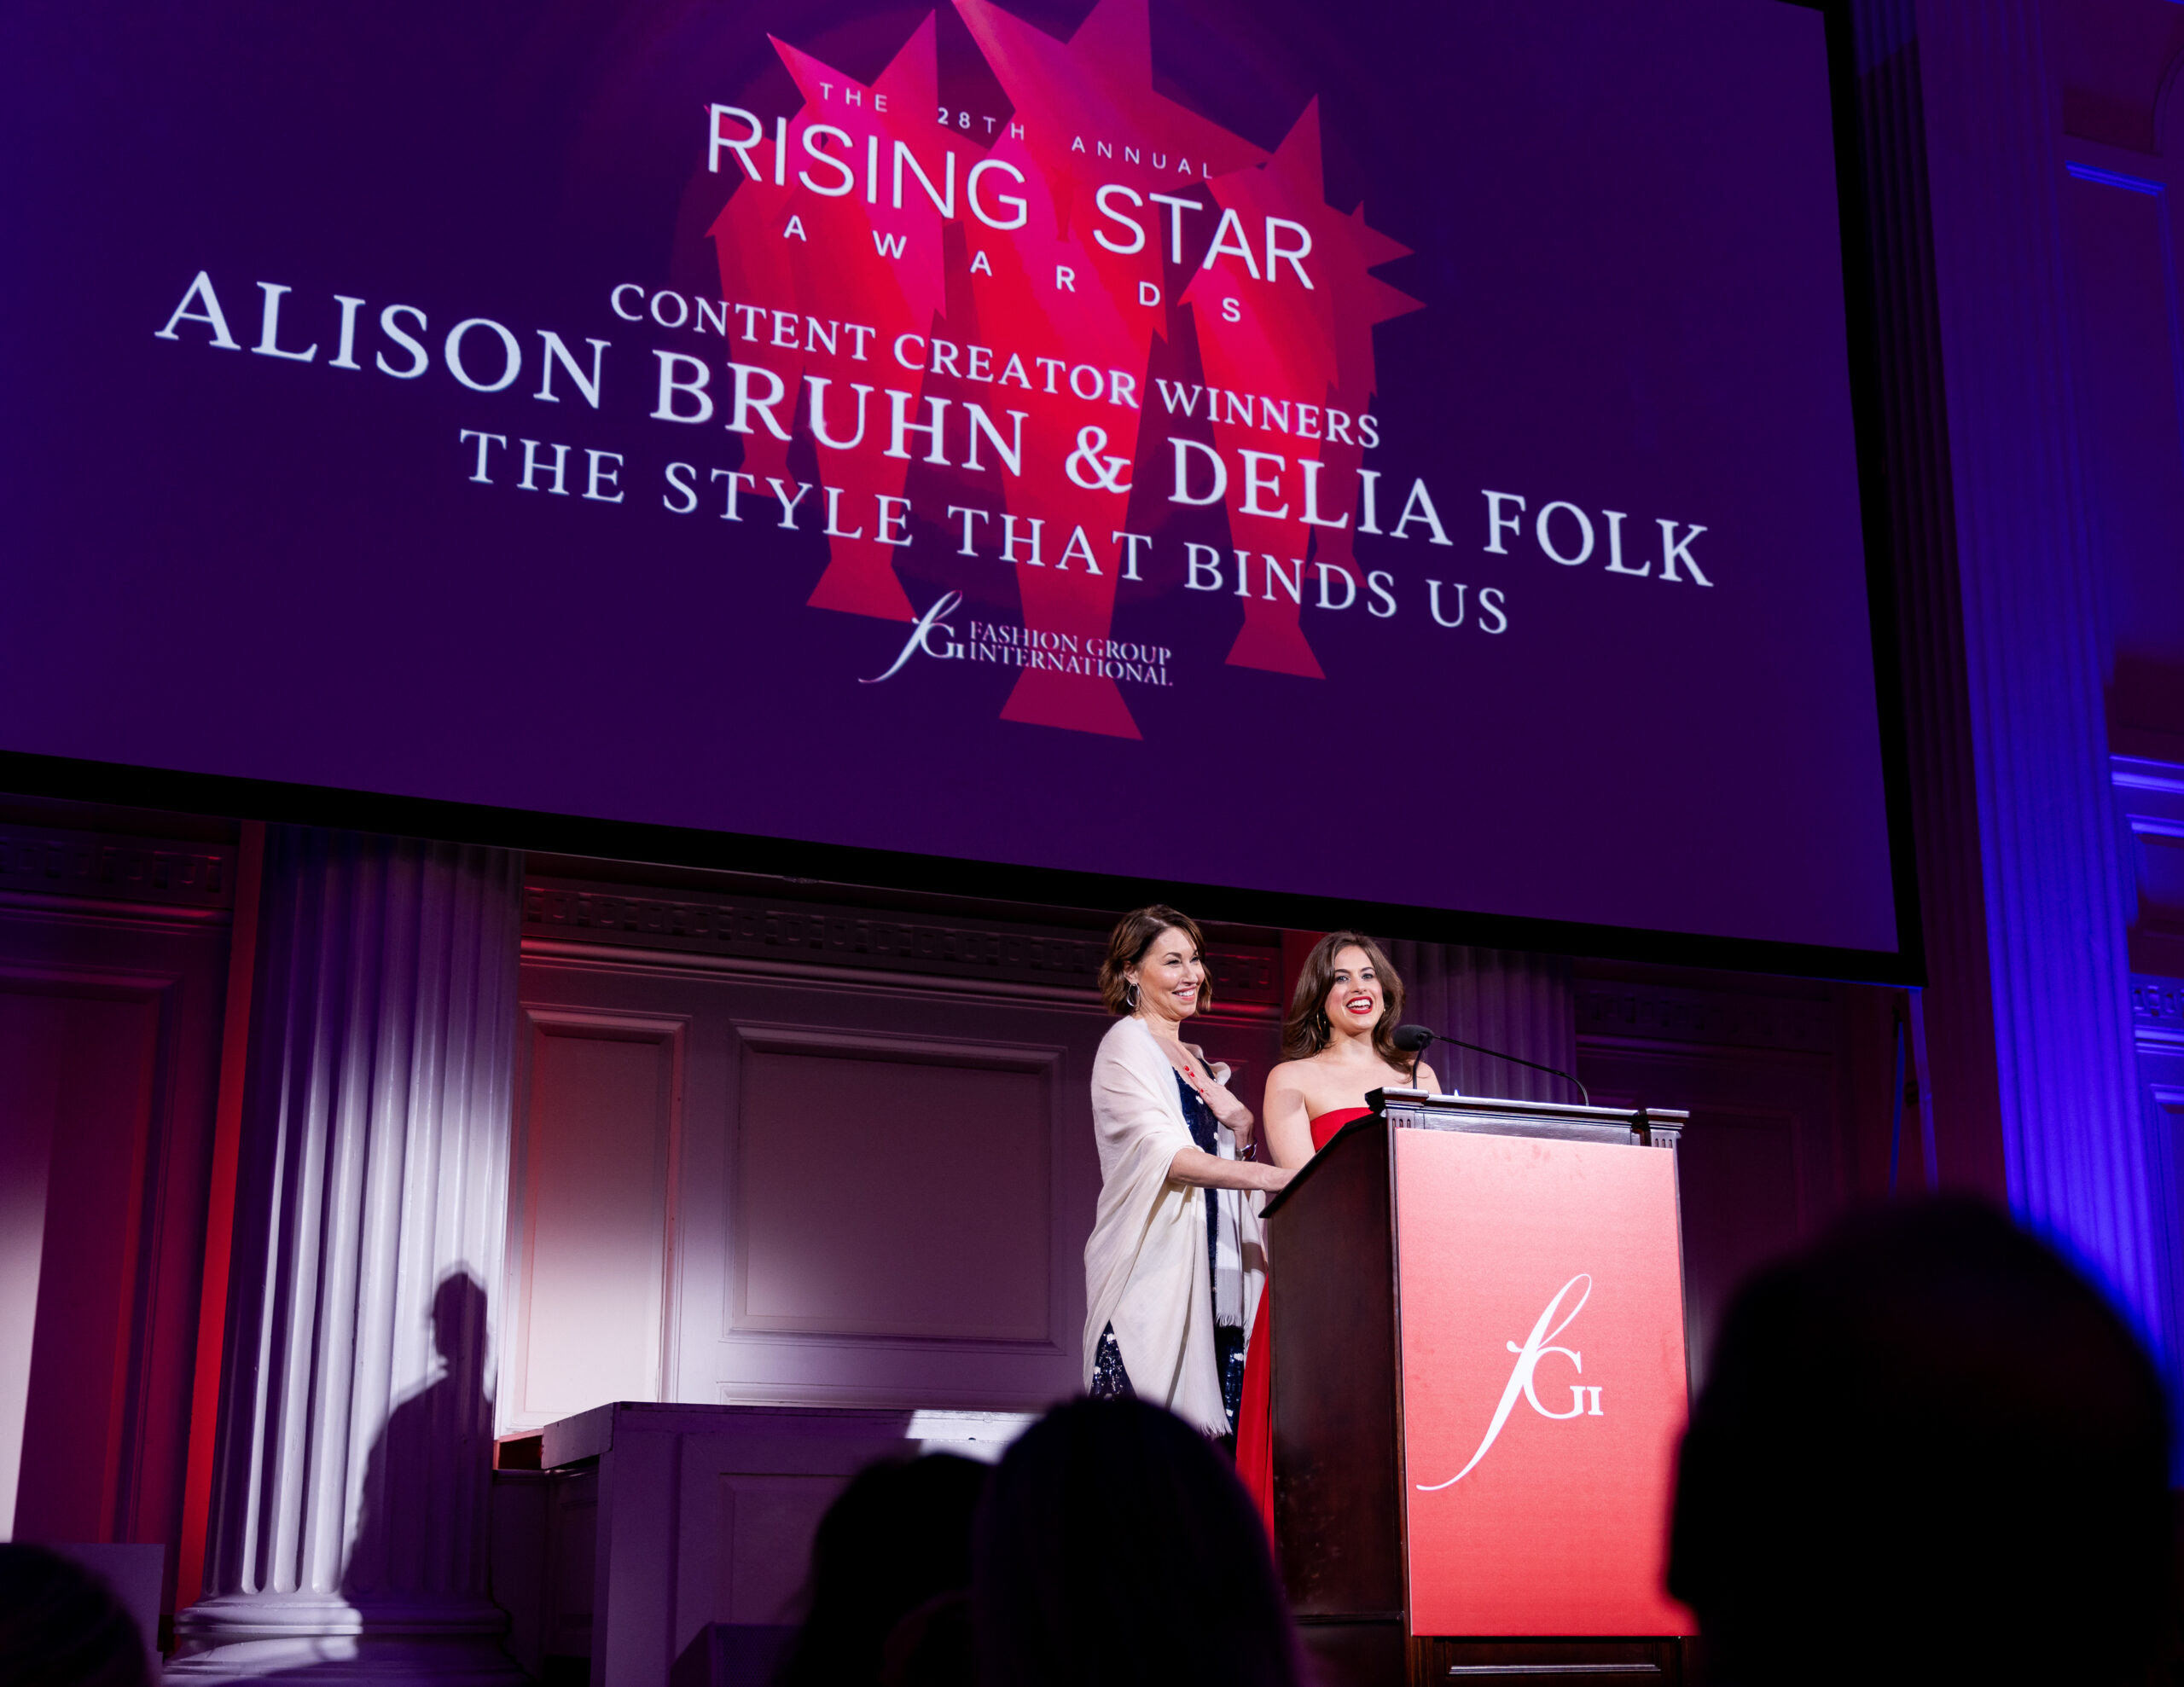 Two women receive their award and are recognized on stage at a fashion event in New York City.